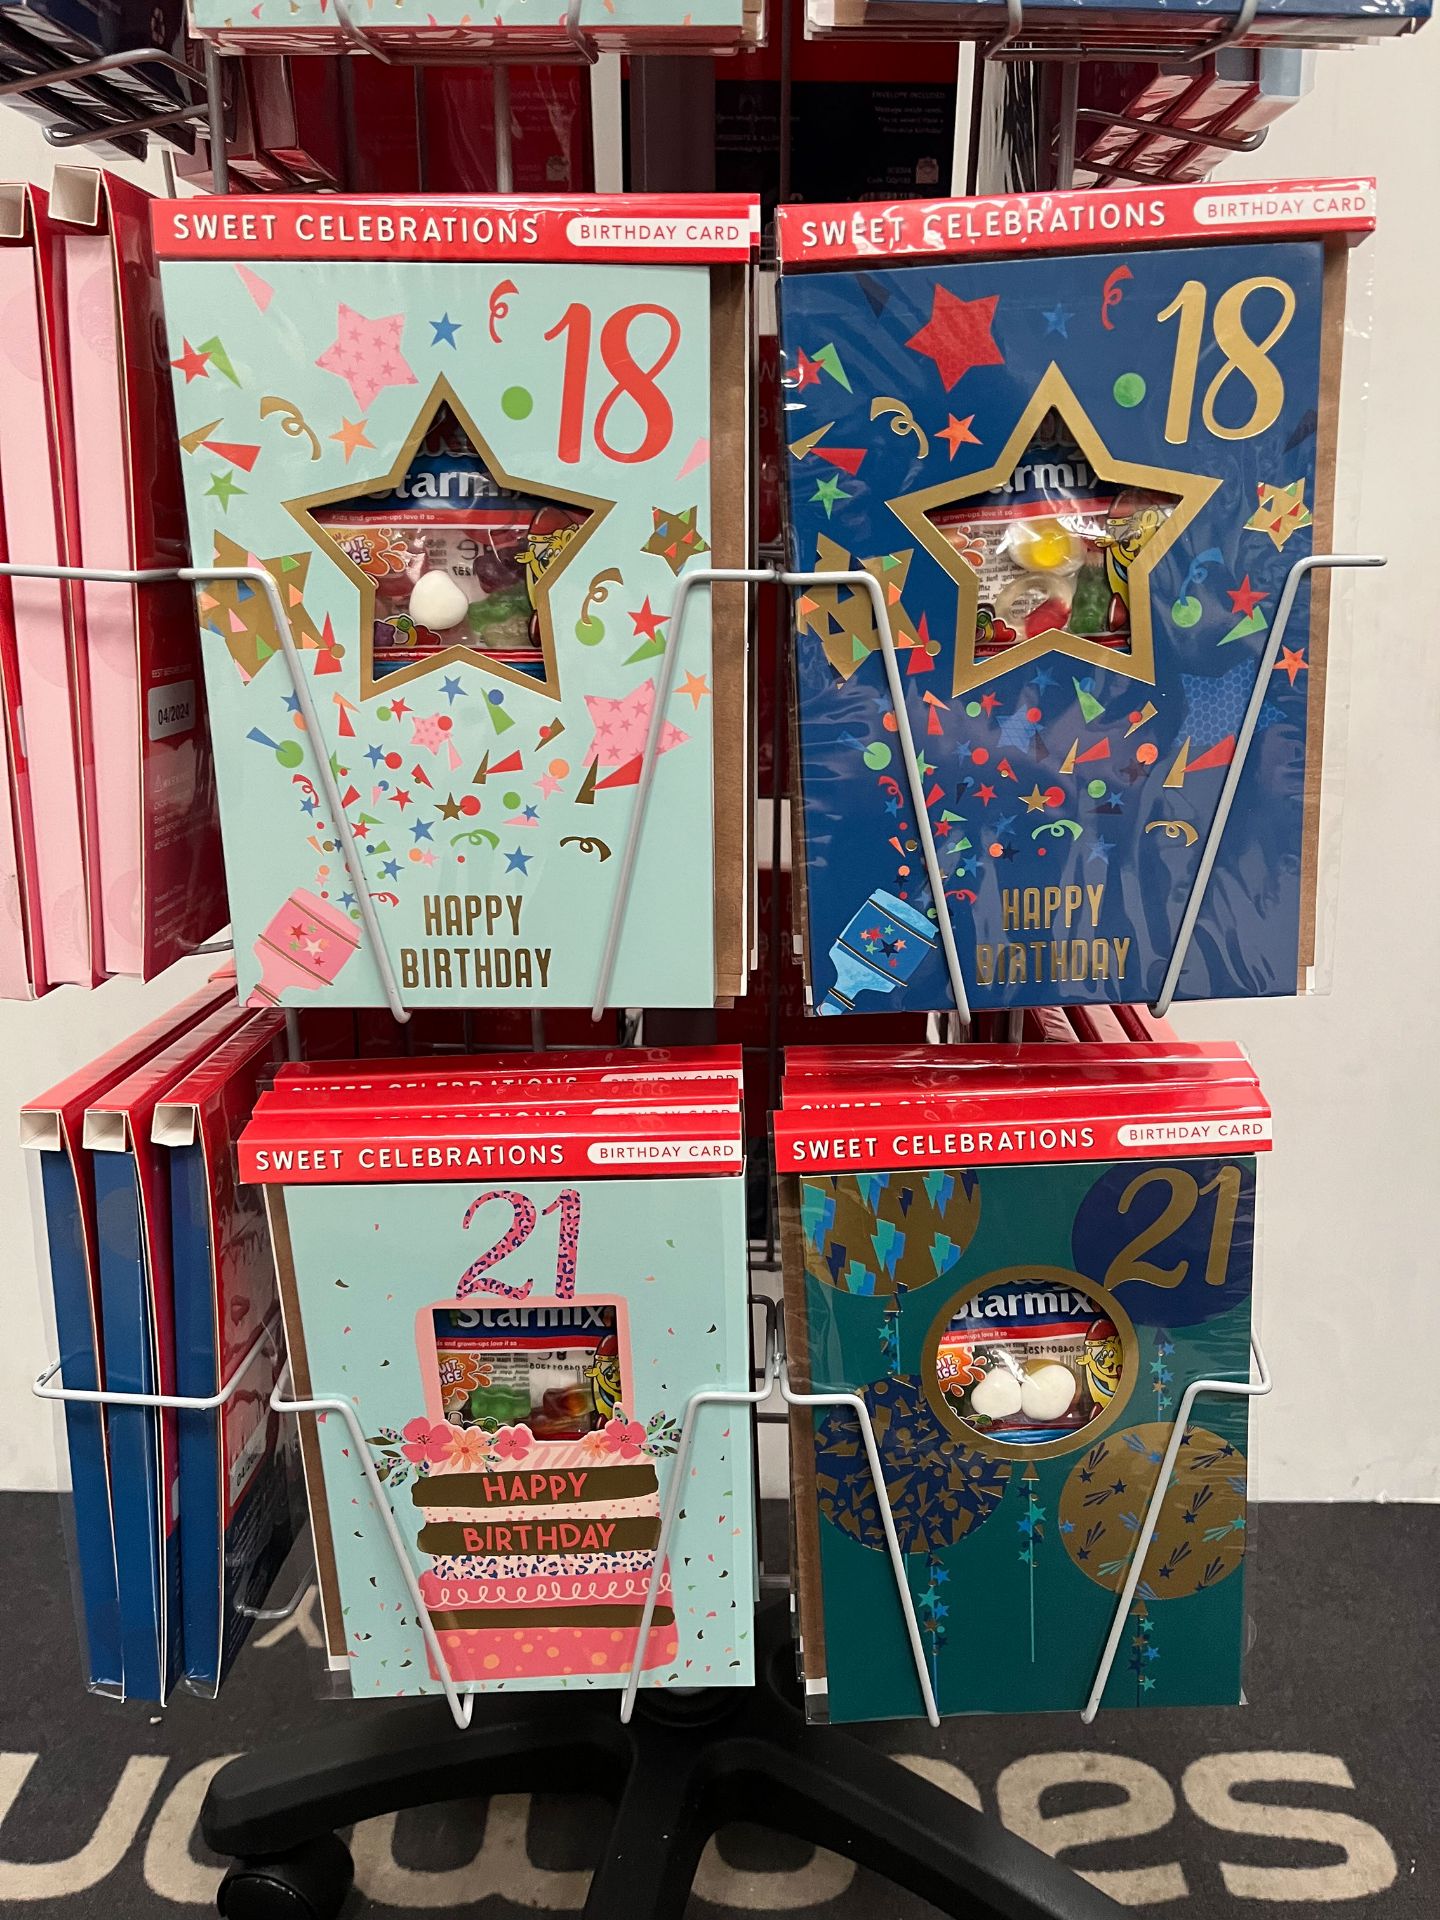 A Stand of Sweets Celebration Cards - Image 16 of 16